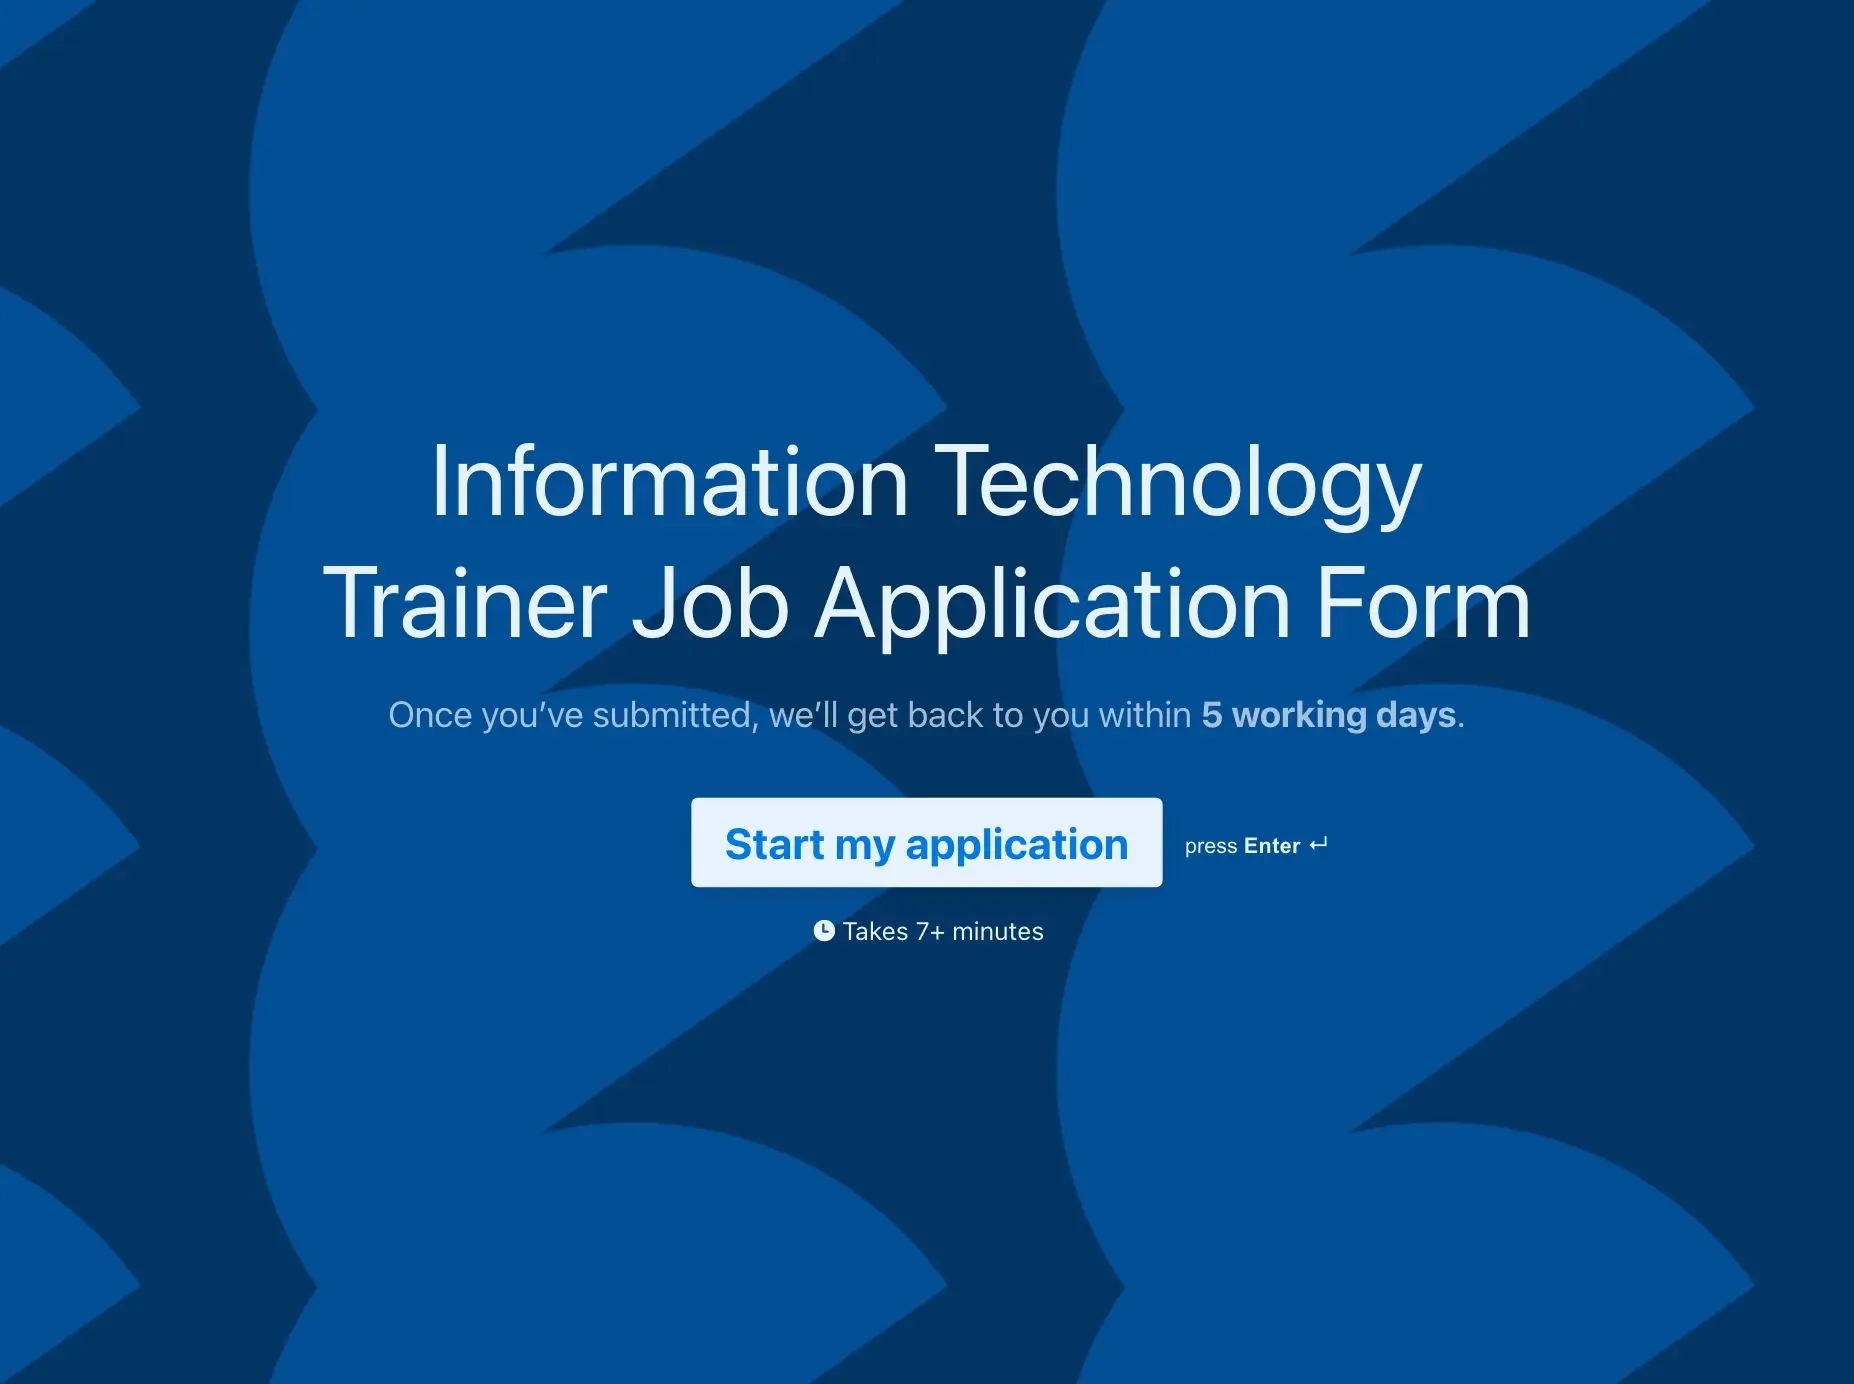 Information Technology Trainer Job Application Form Template Hero